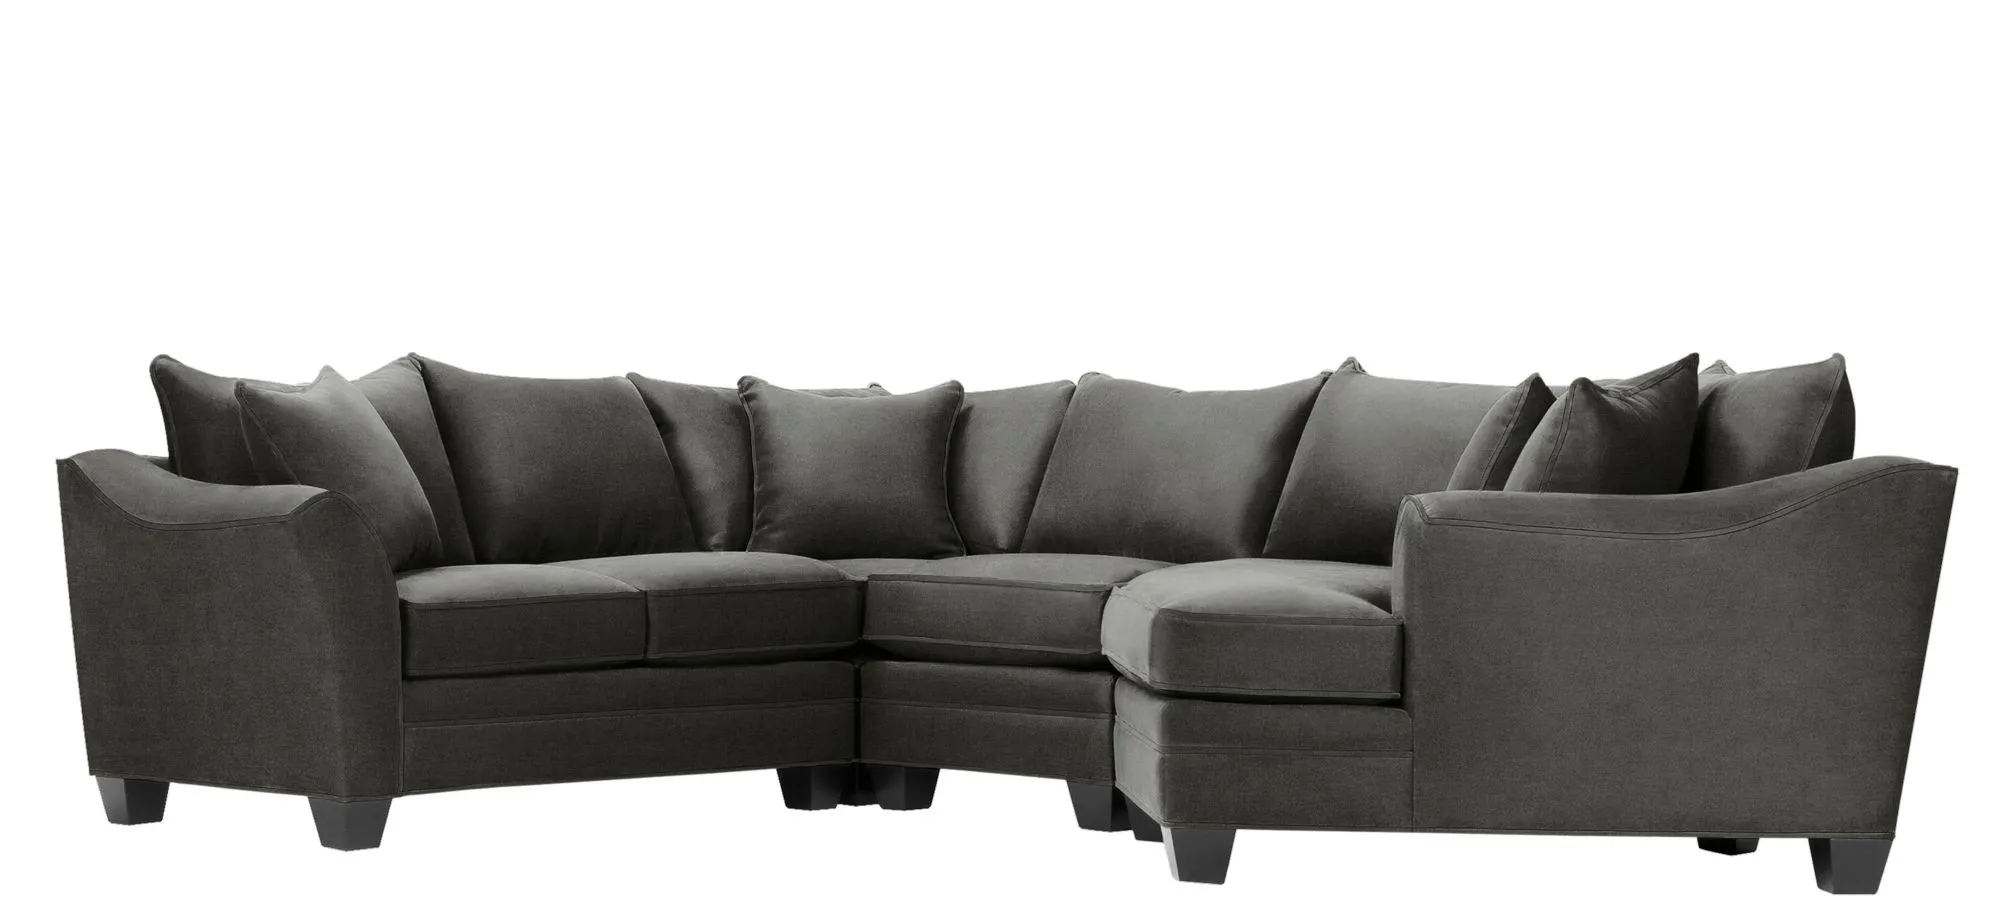 Foresthill 4-pc. Right Hand Cuddler Sectional Sofa in Santa Rosa Slate by H.M. Richards